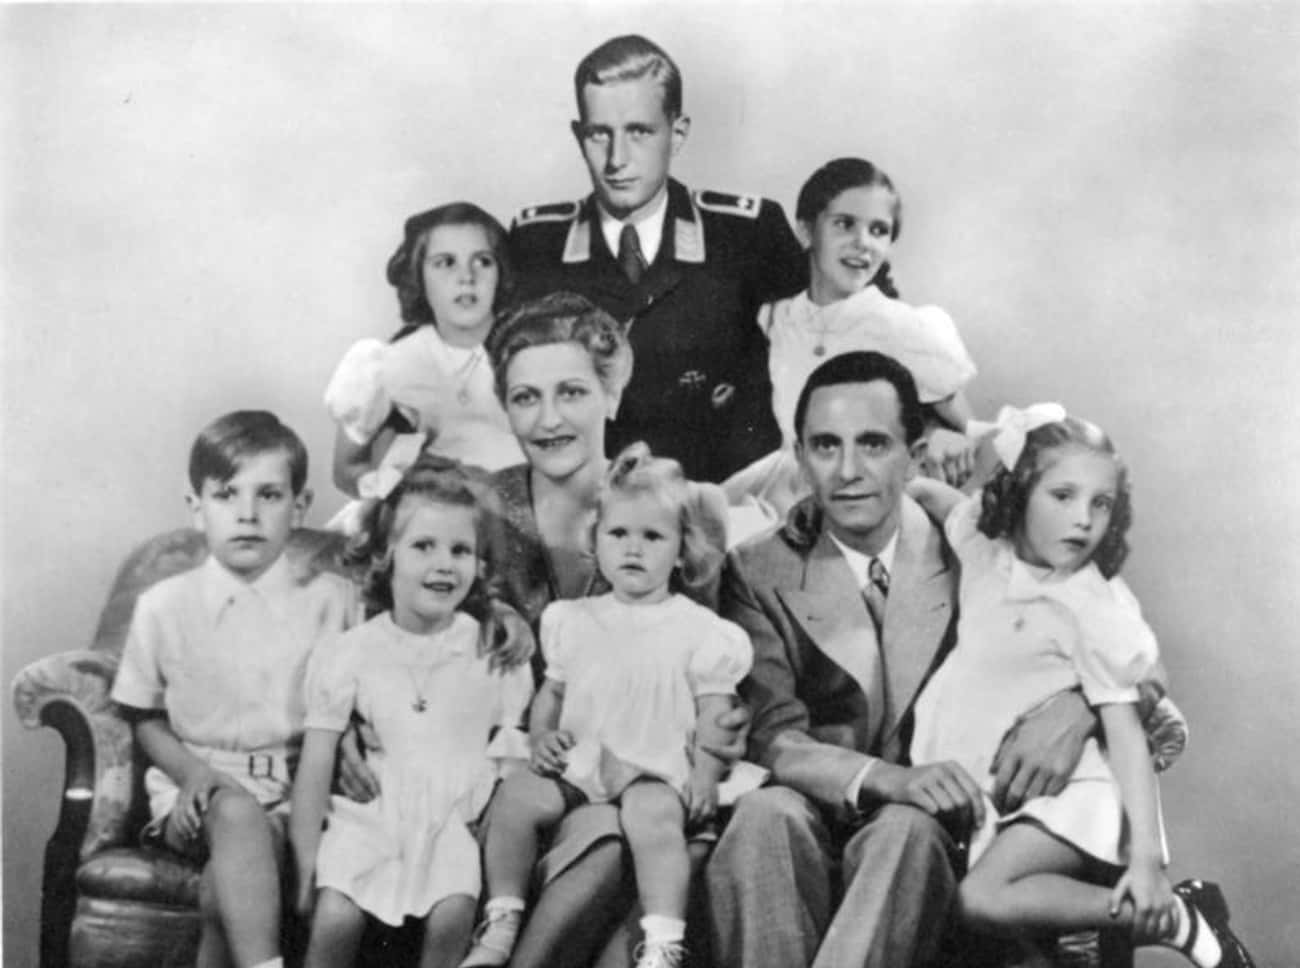 Joseph And Magda Goebbels Killed Themselves And Their Six Young Children